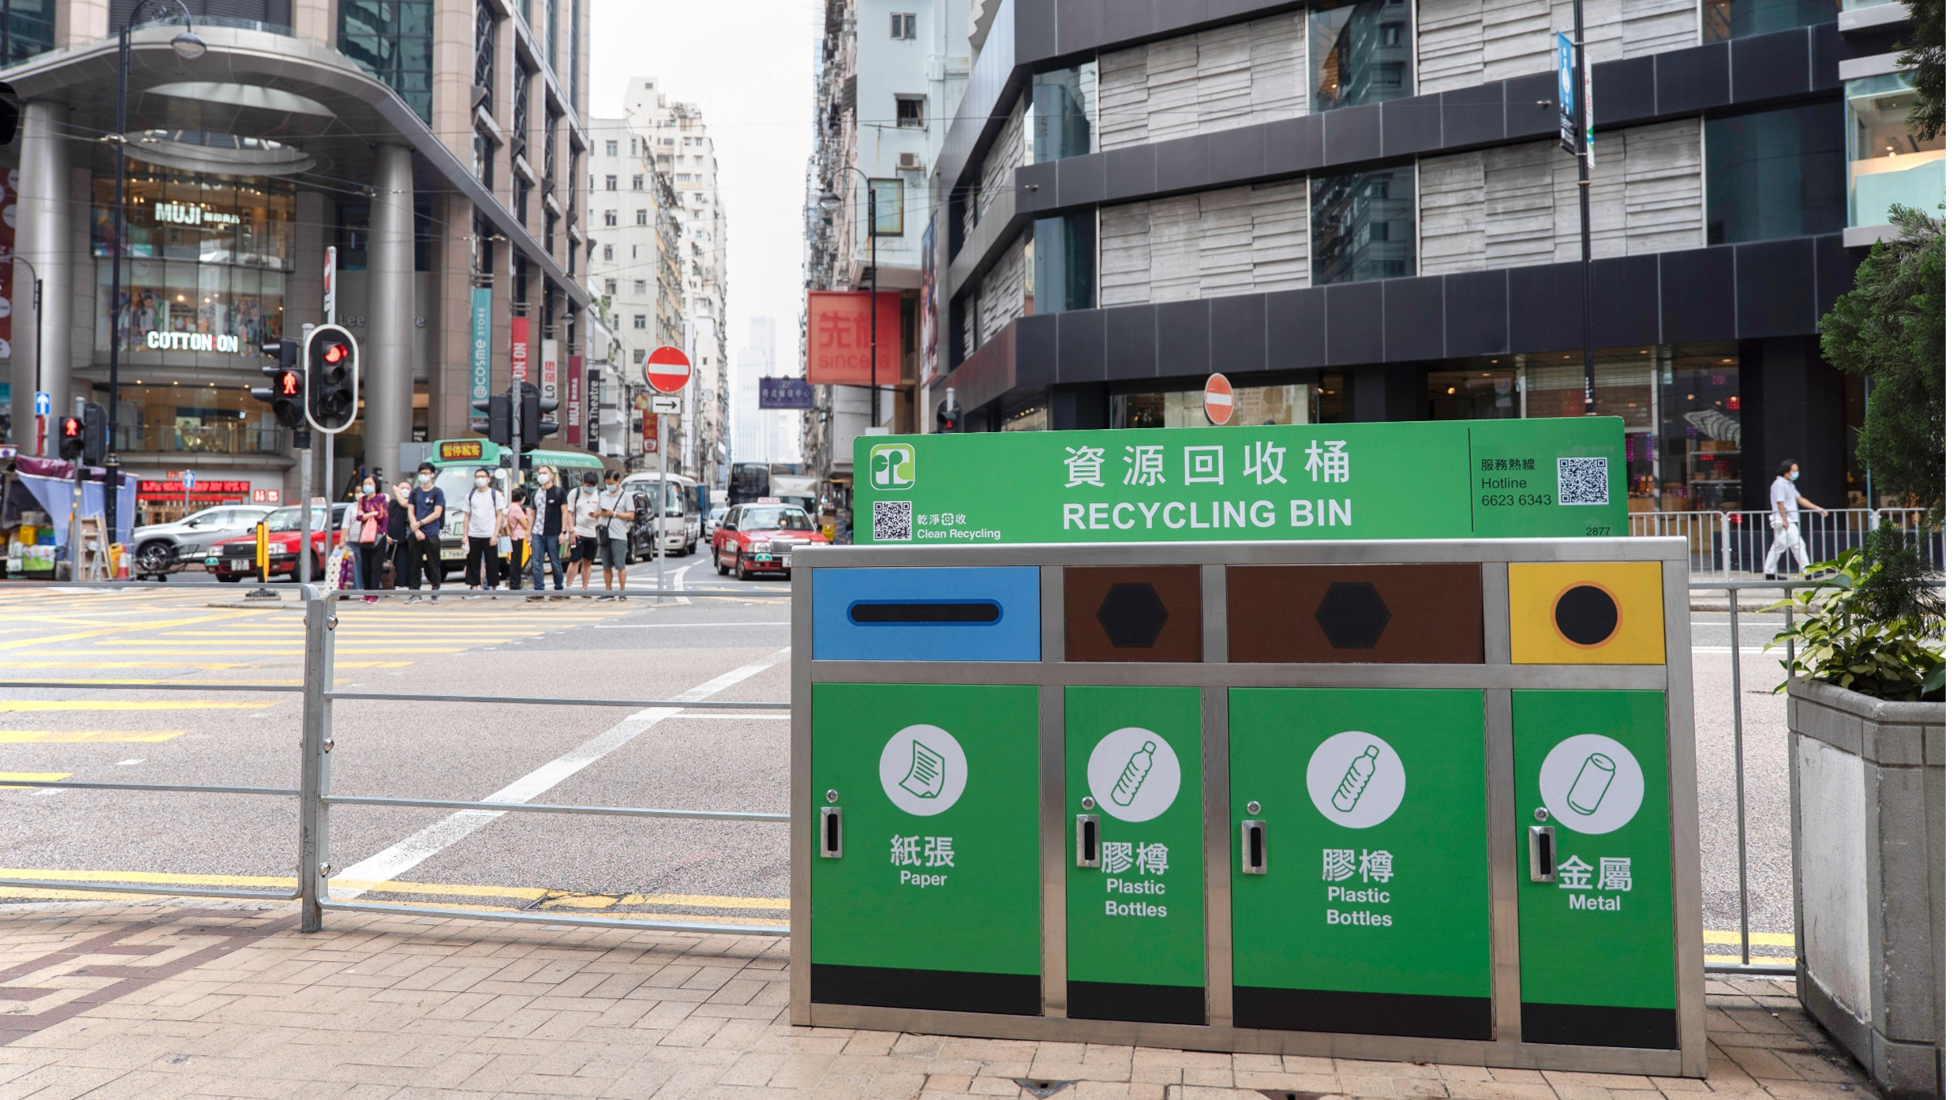 Recycling Bins in Public Places